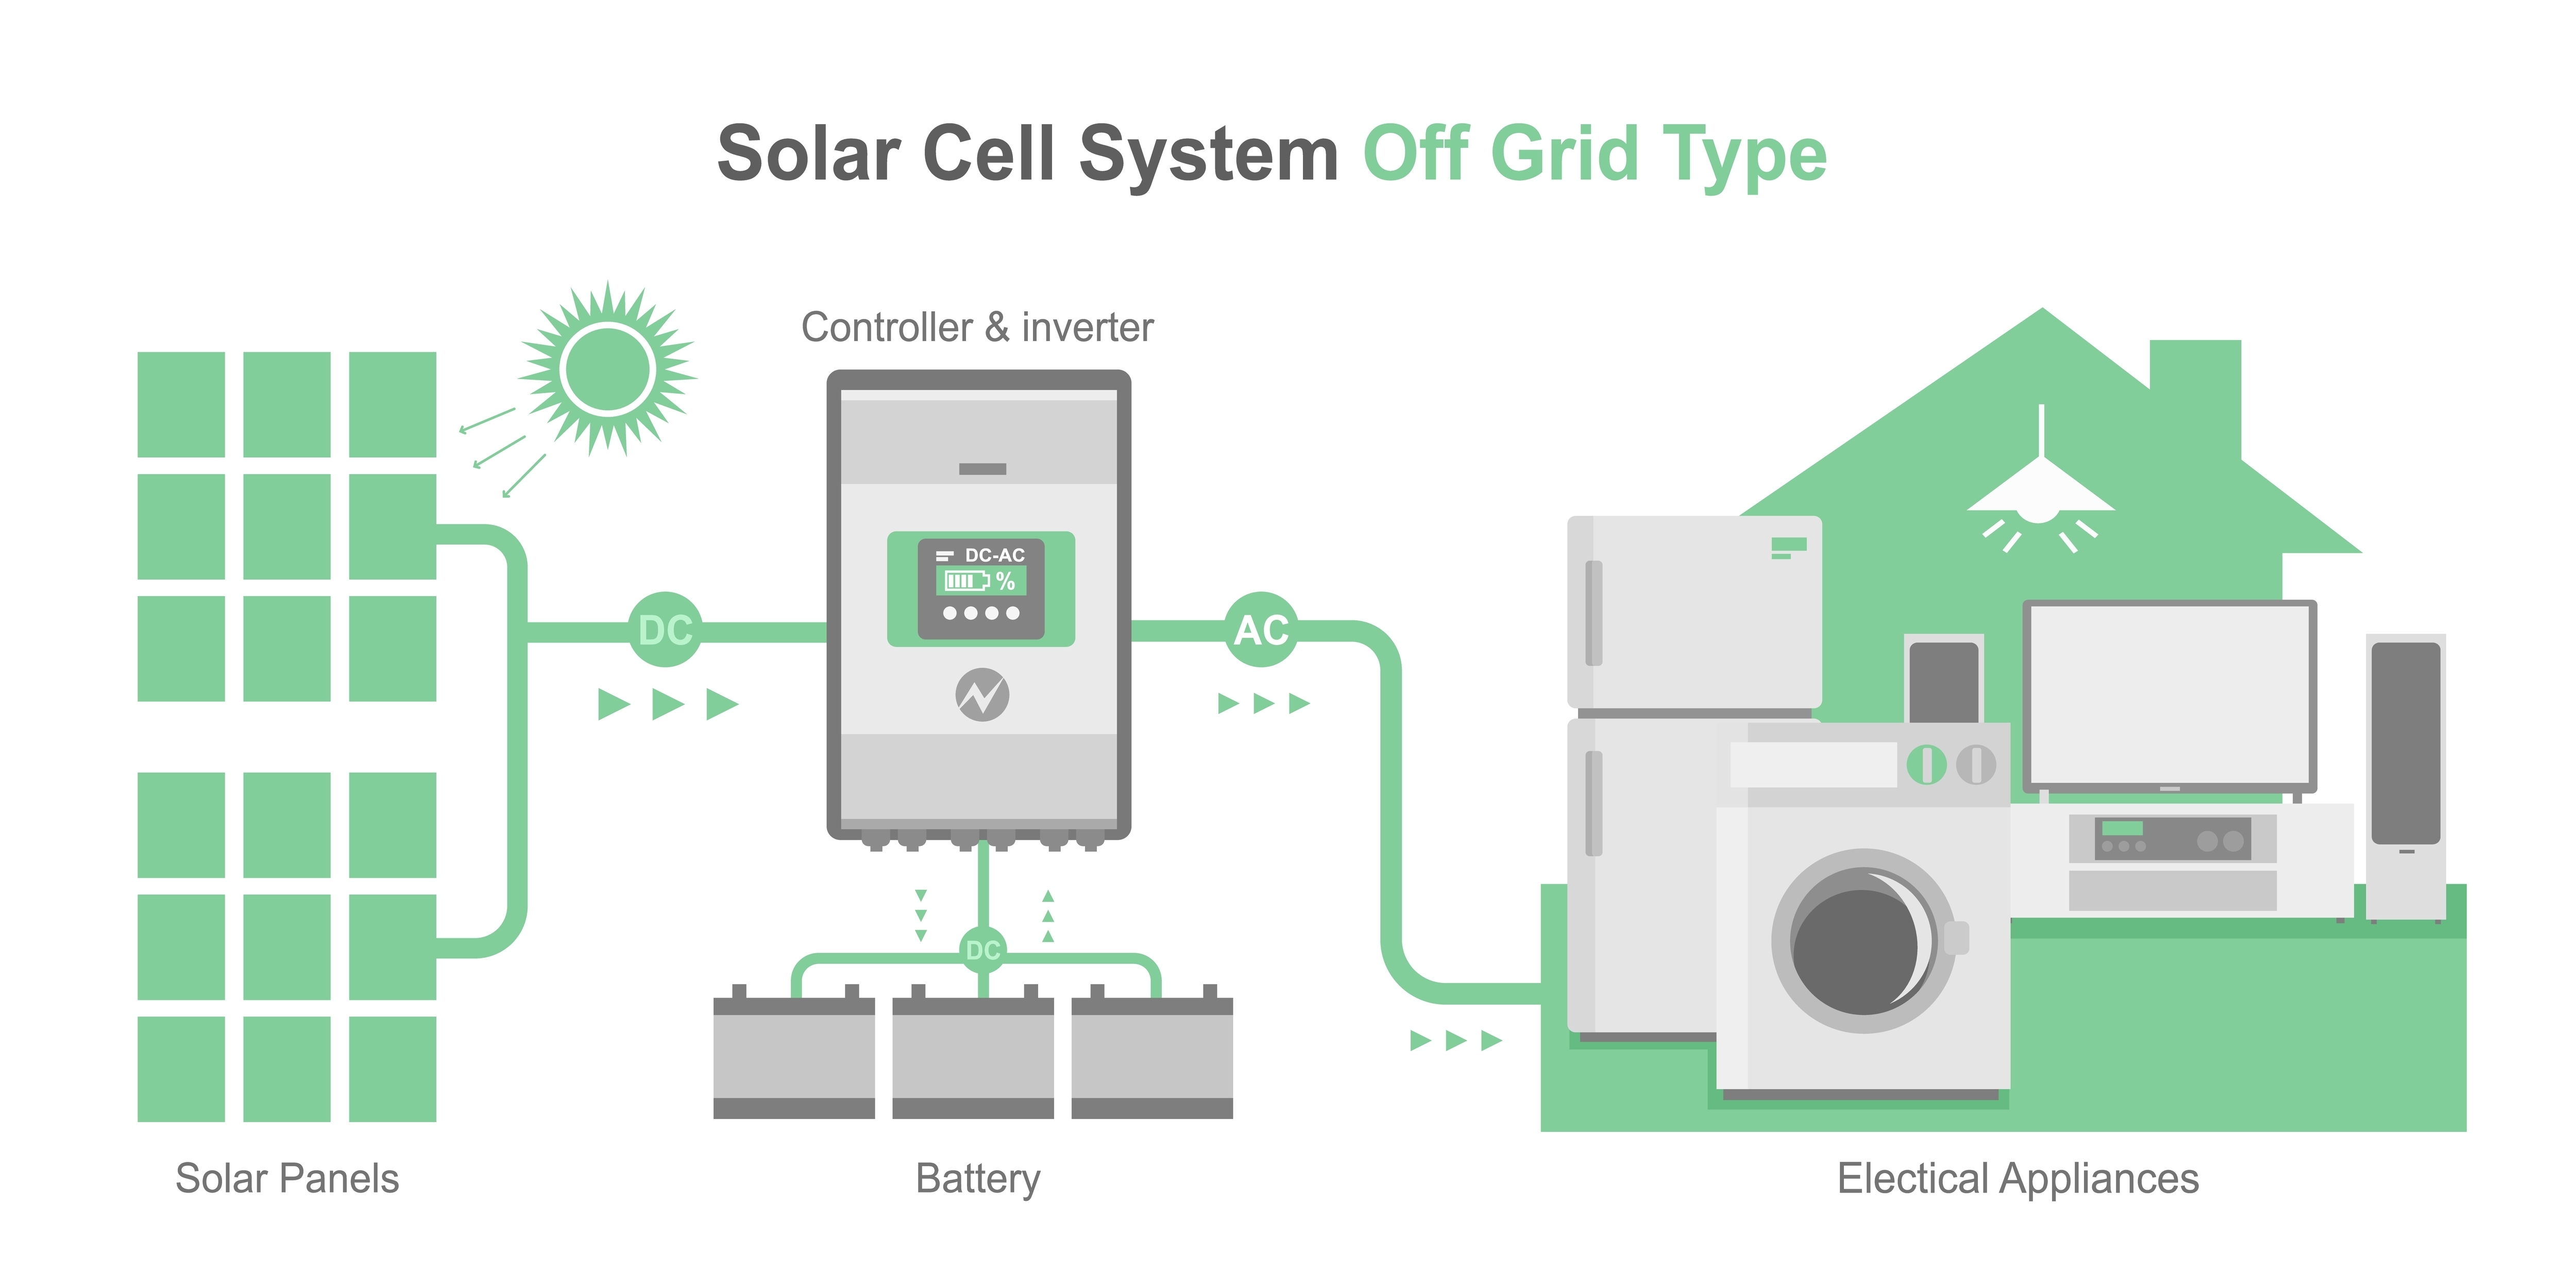 Off,grid,solar,cell,simple,diagram,system,house,concept,inverter